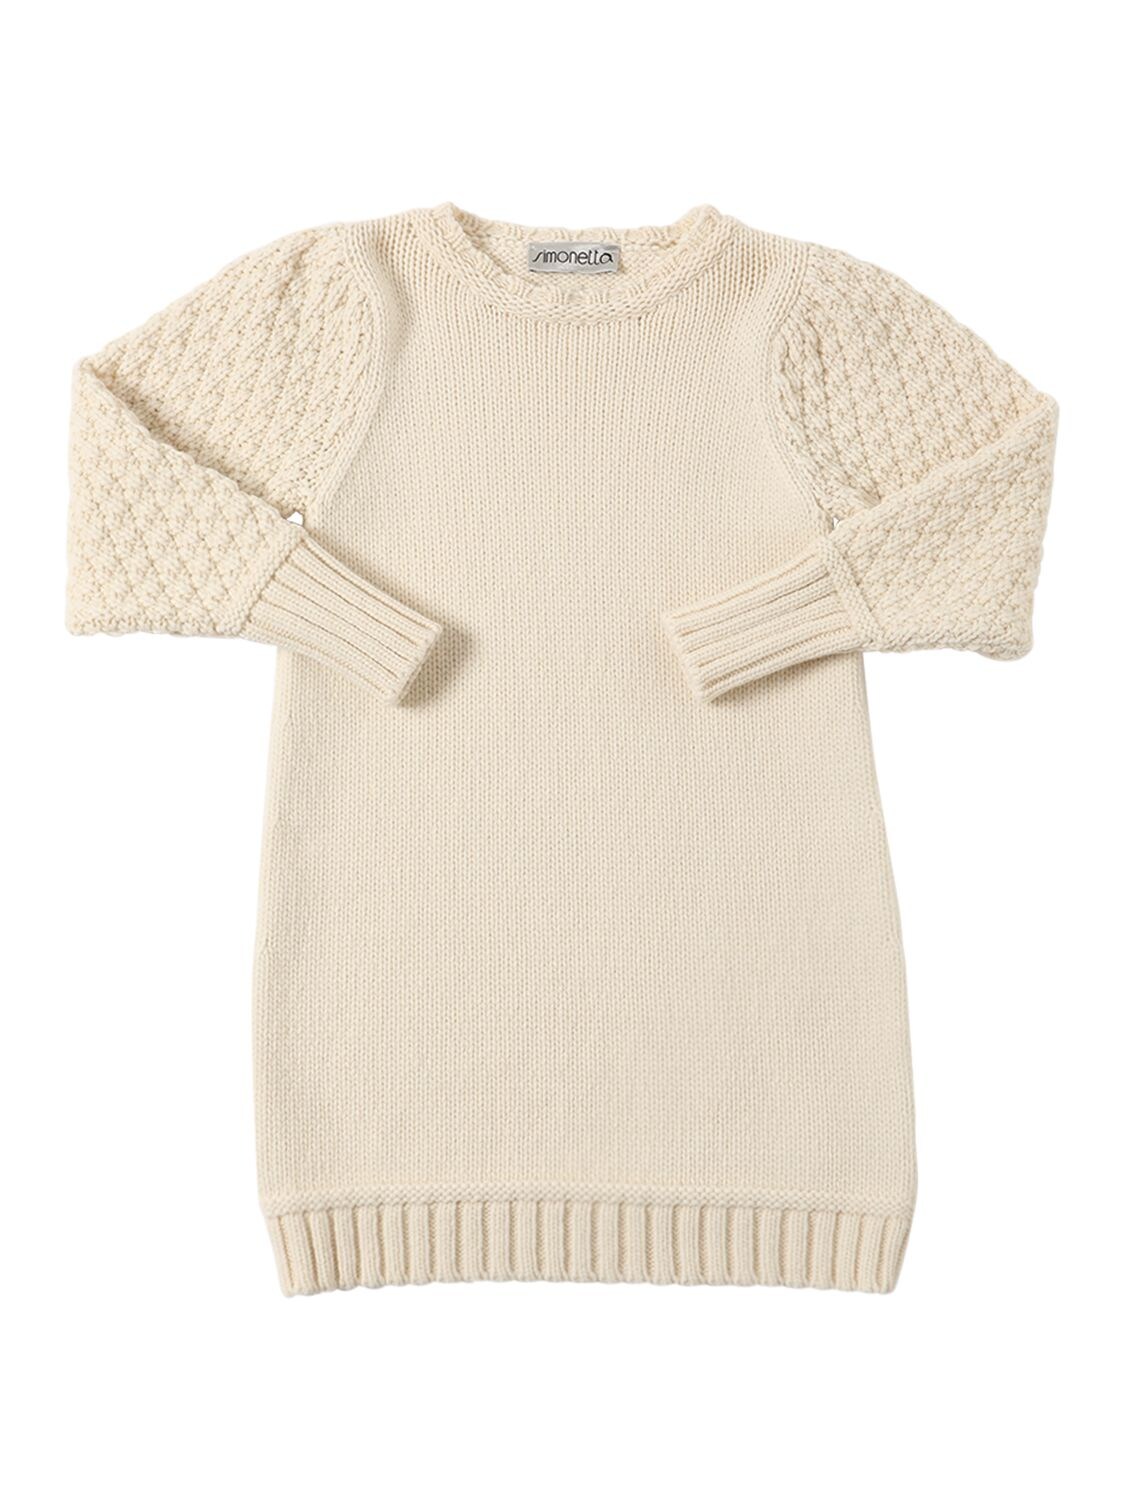 Simonetta Kids' Wool Blend Cable Knit Dress In Ivory